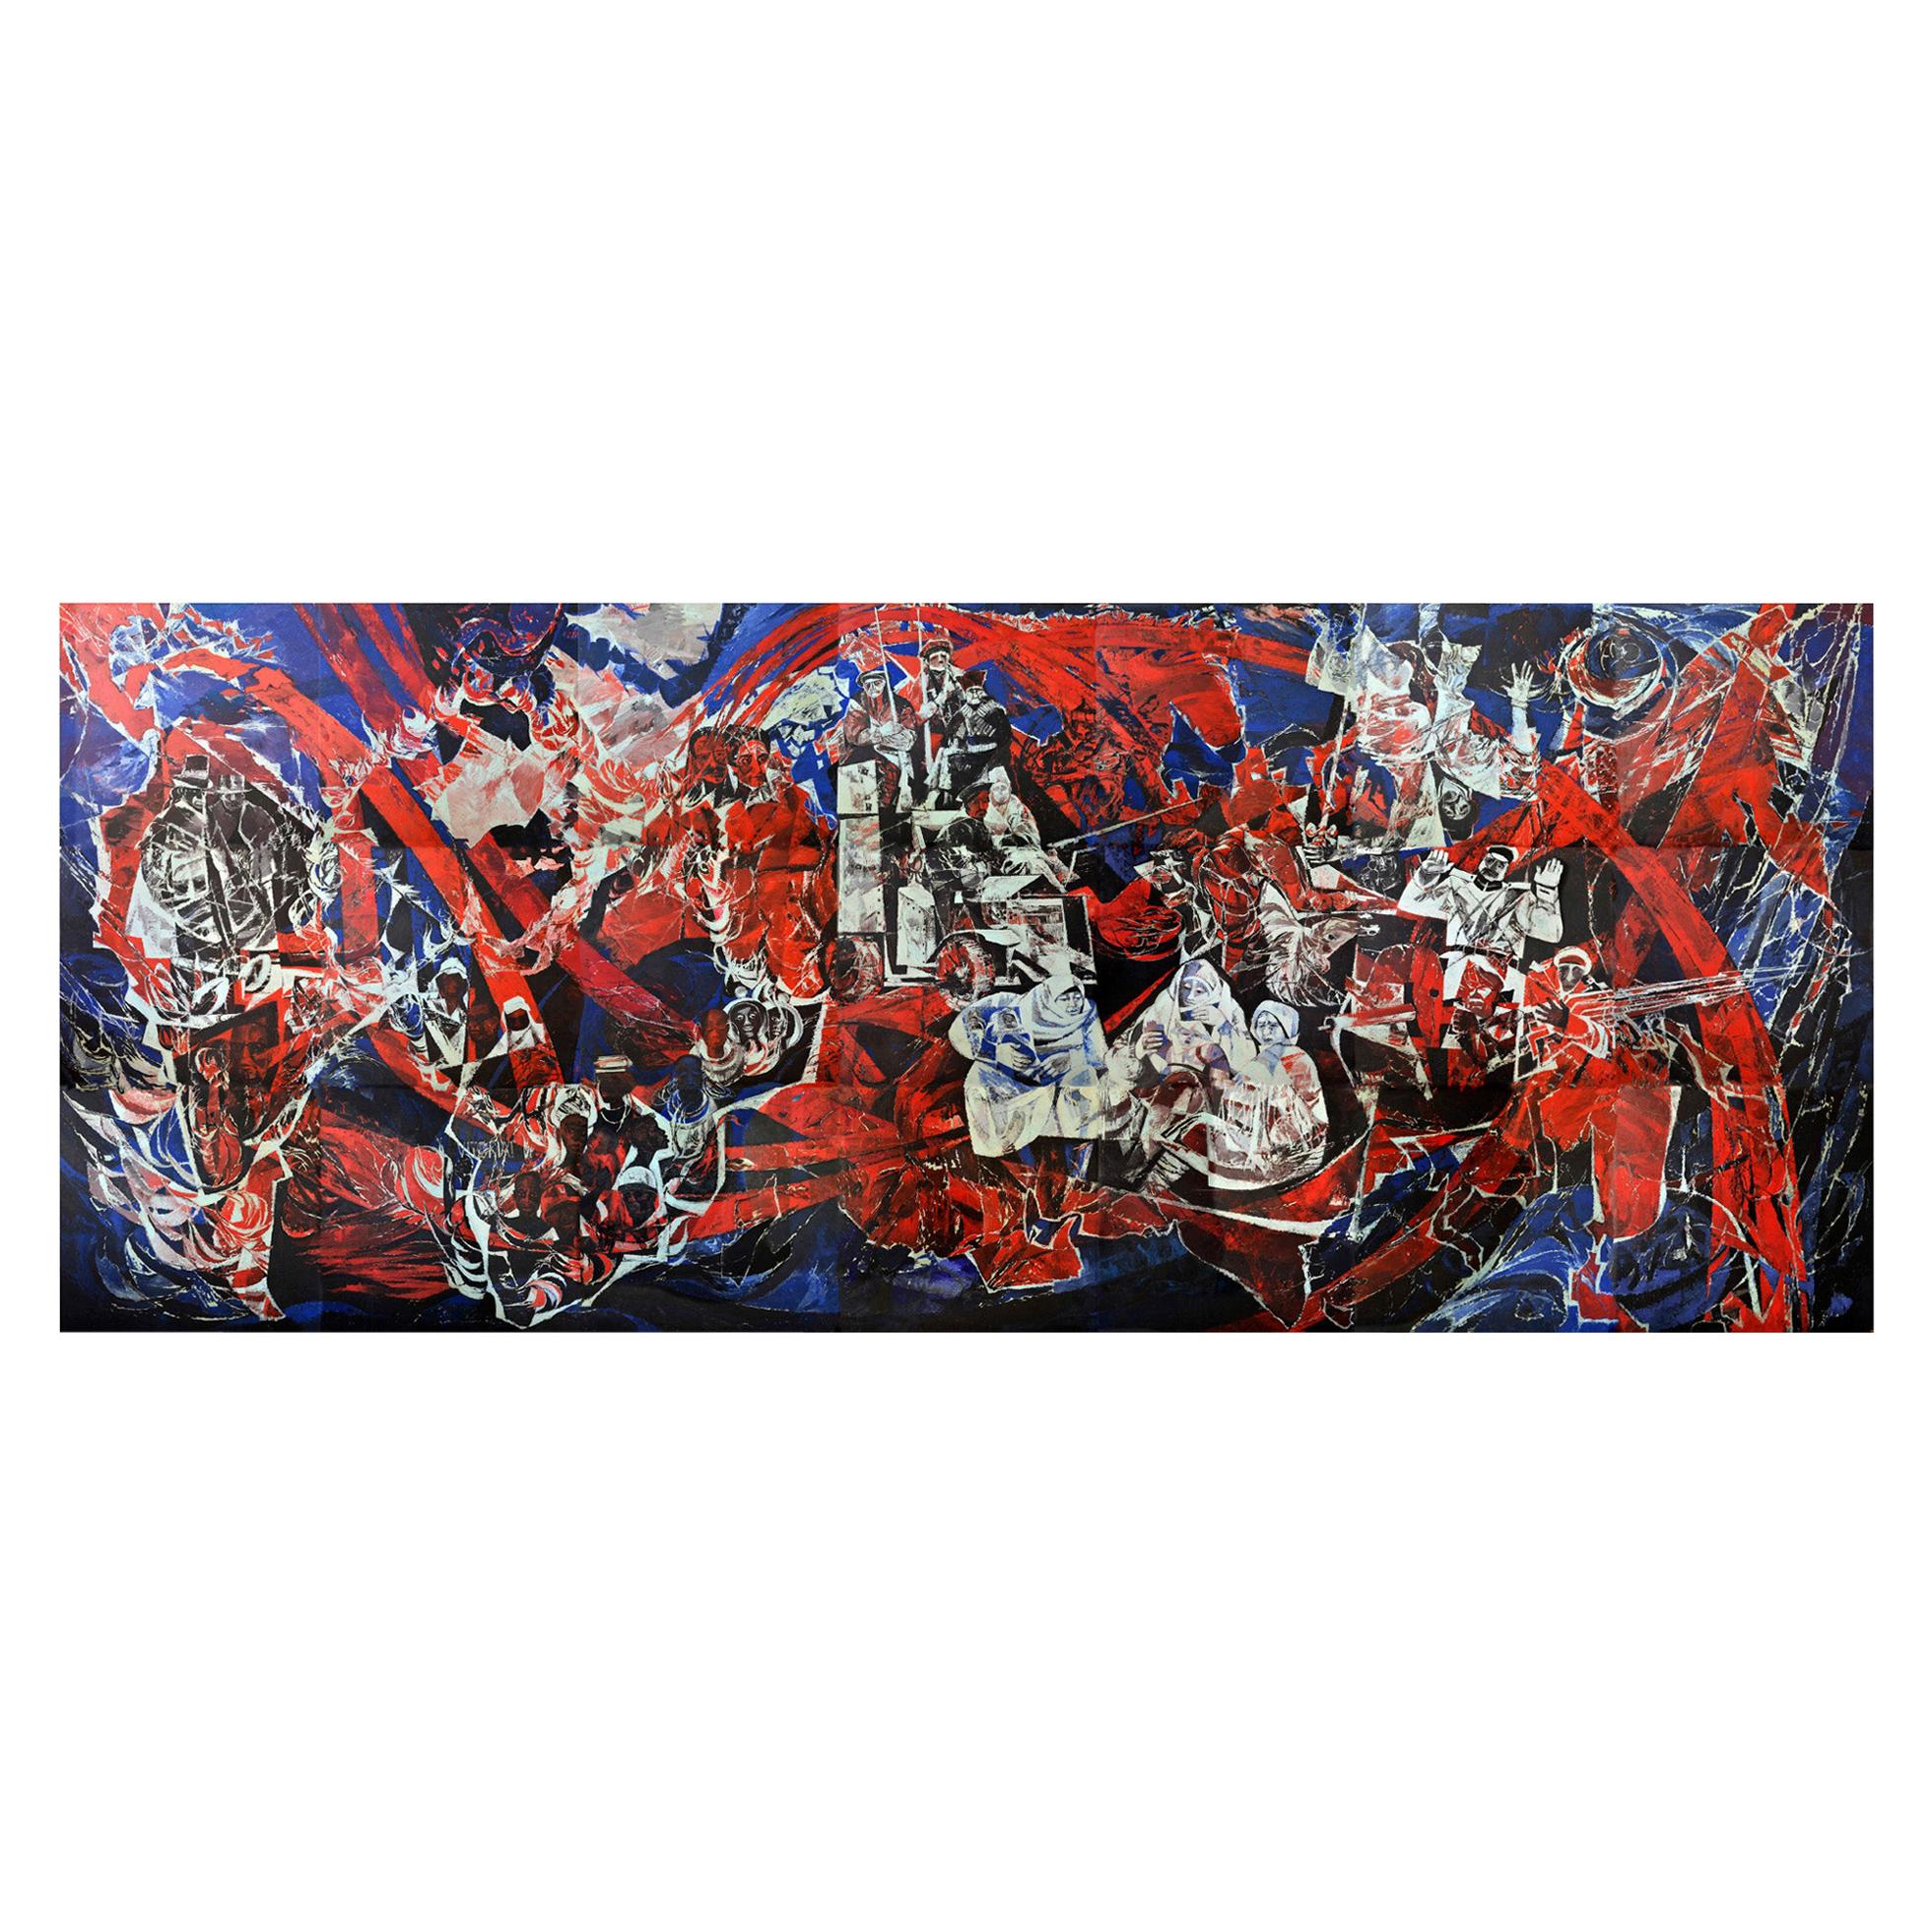 Large Wall Painting "The Ways Of The Red October" October Revolution, Kandt, DDR For Sale